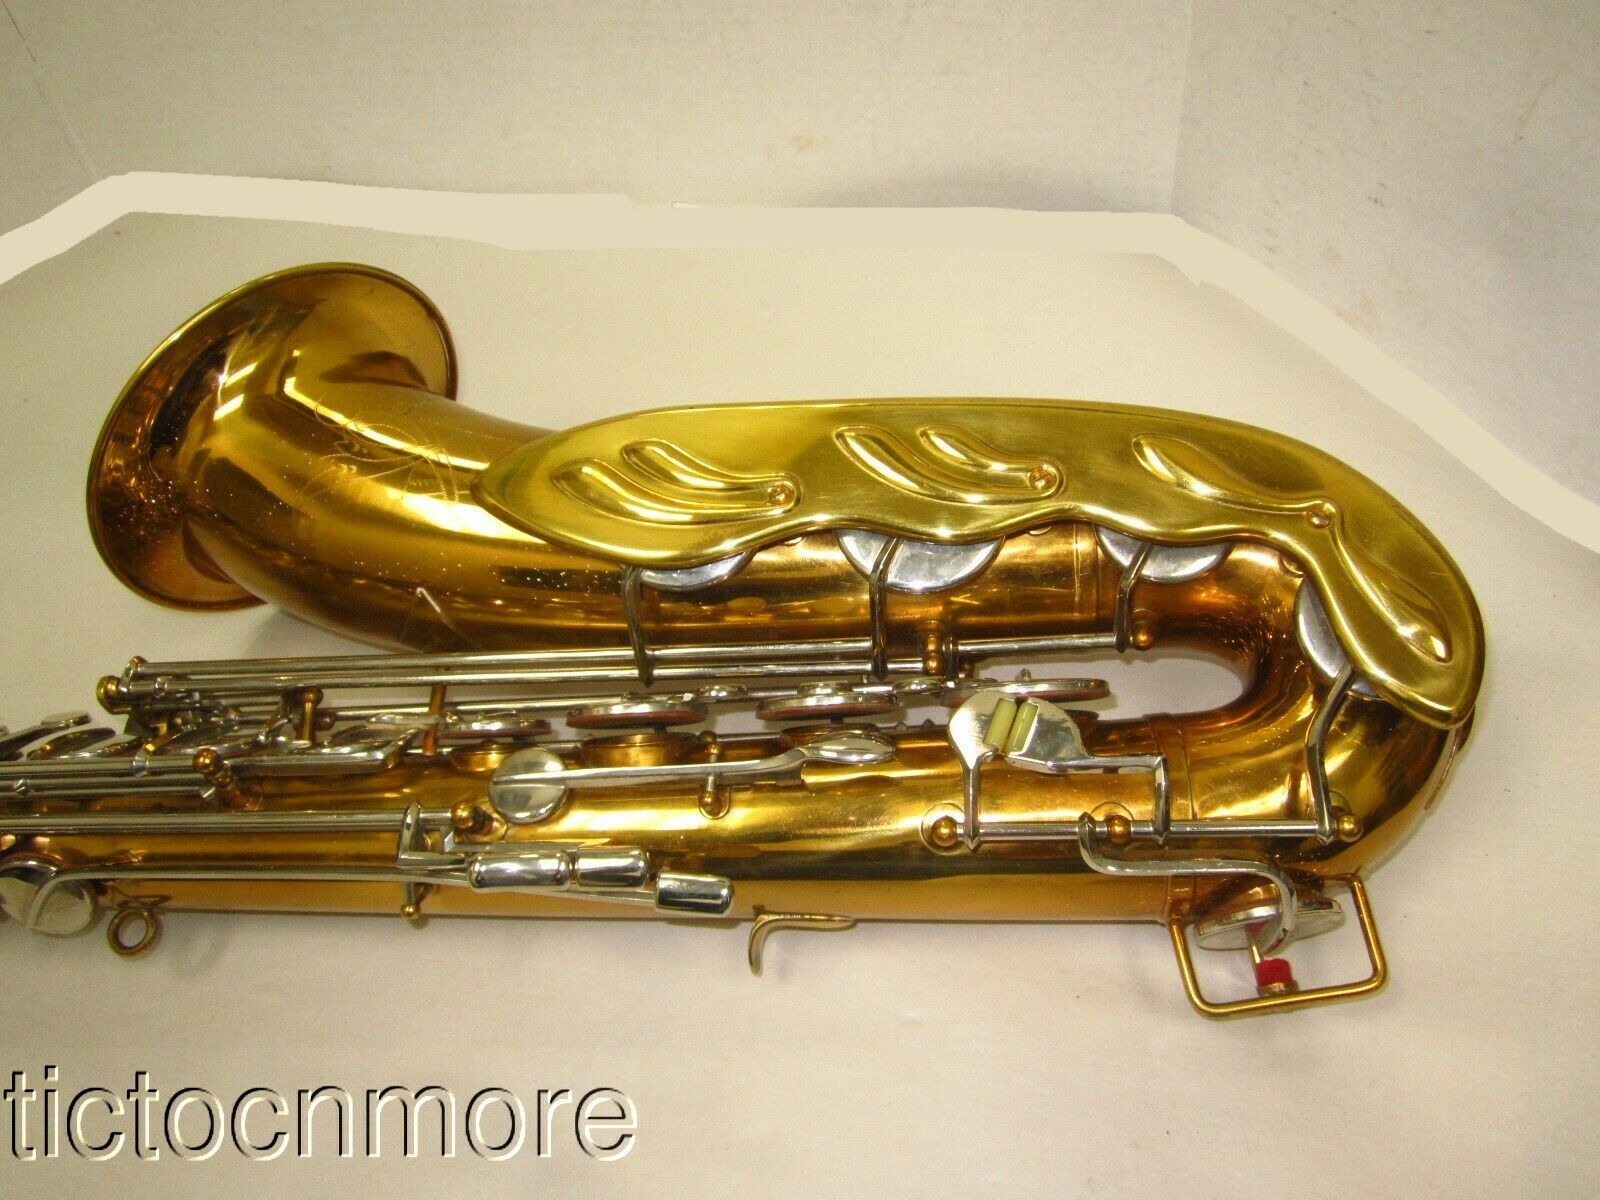 VINTAGE KEILWERTH SAX No 7500 SAXOPHONE GERMANY ETCHED BELL FANCY KEY GUARD CASE